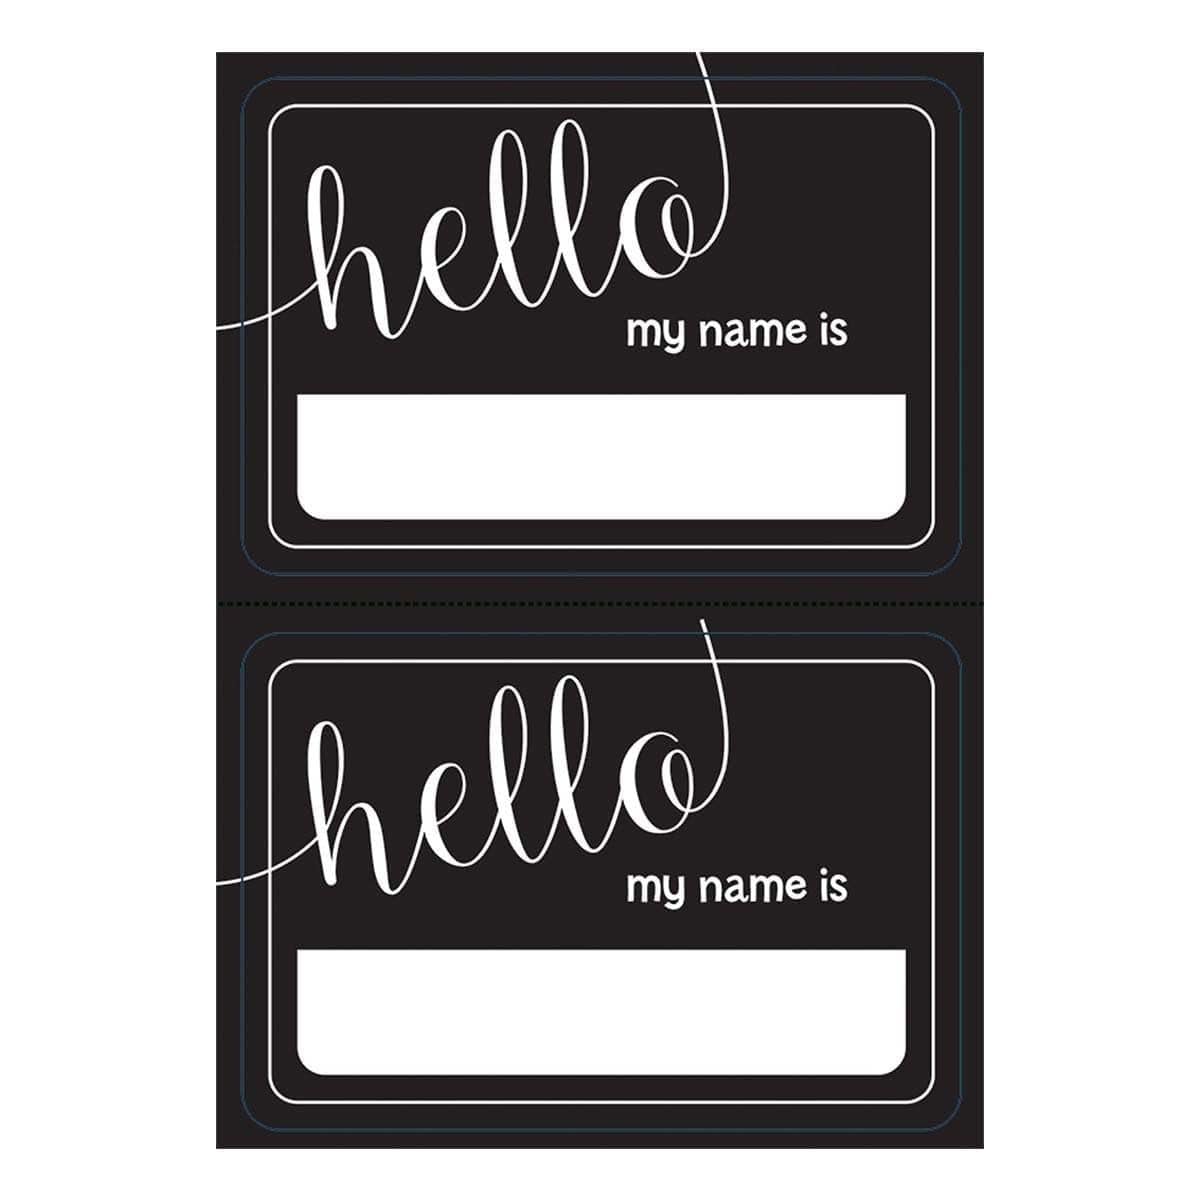 Buy Paper Goods Name Tag - Chalkboard Look 100/pkg. sold at Party Expert